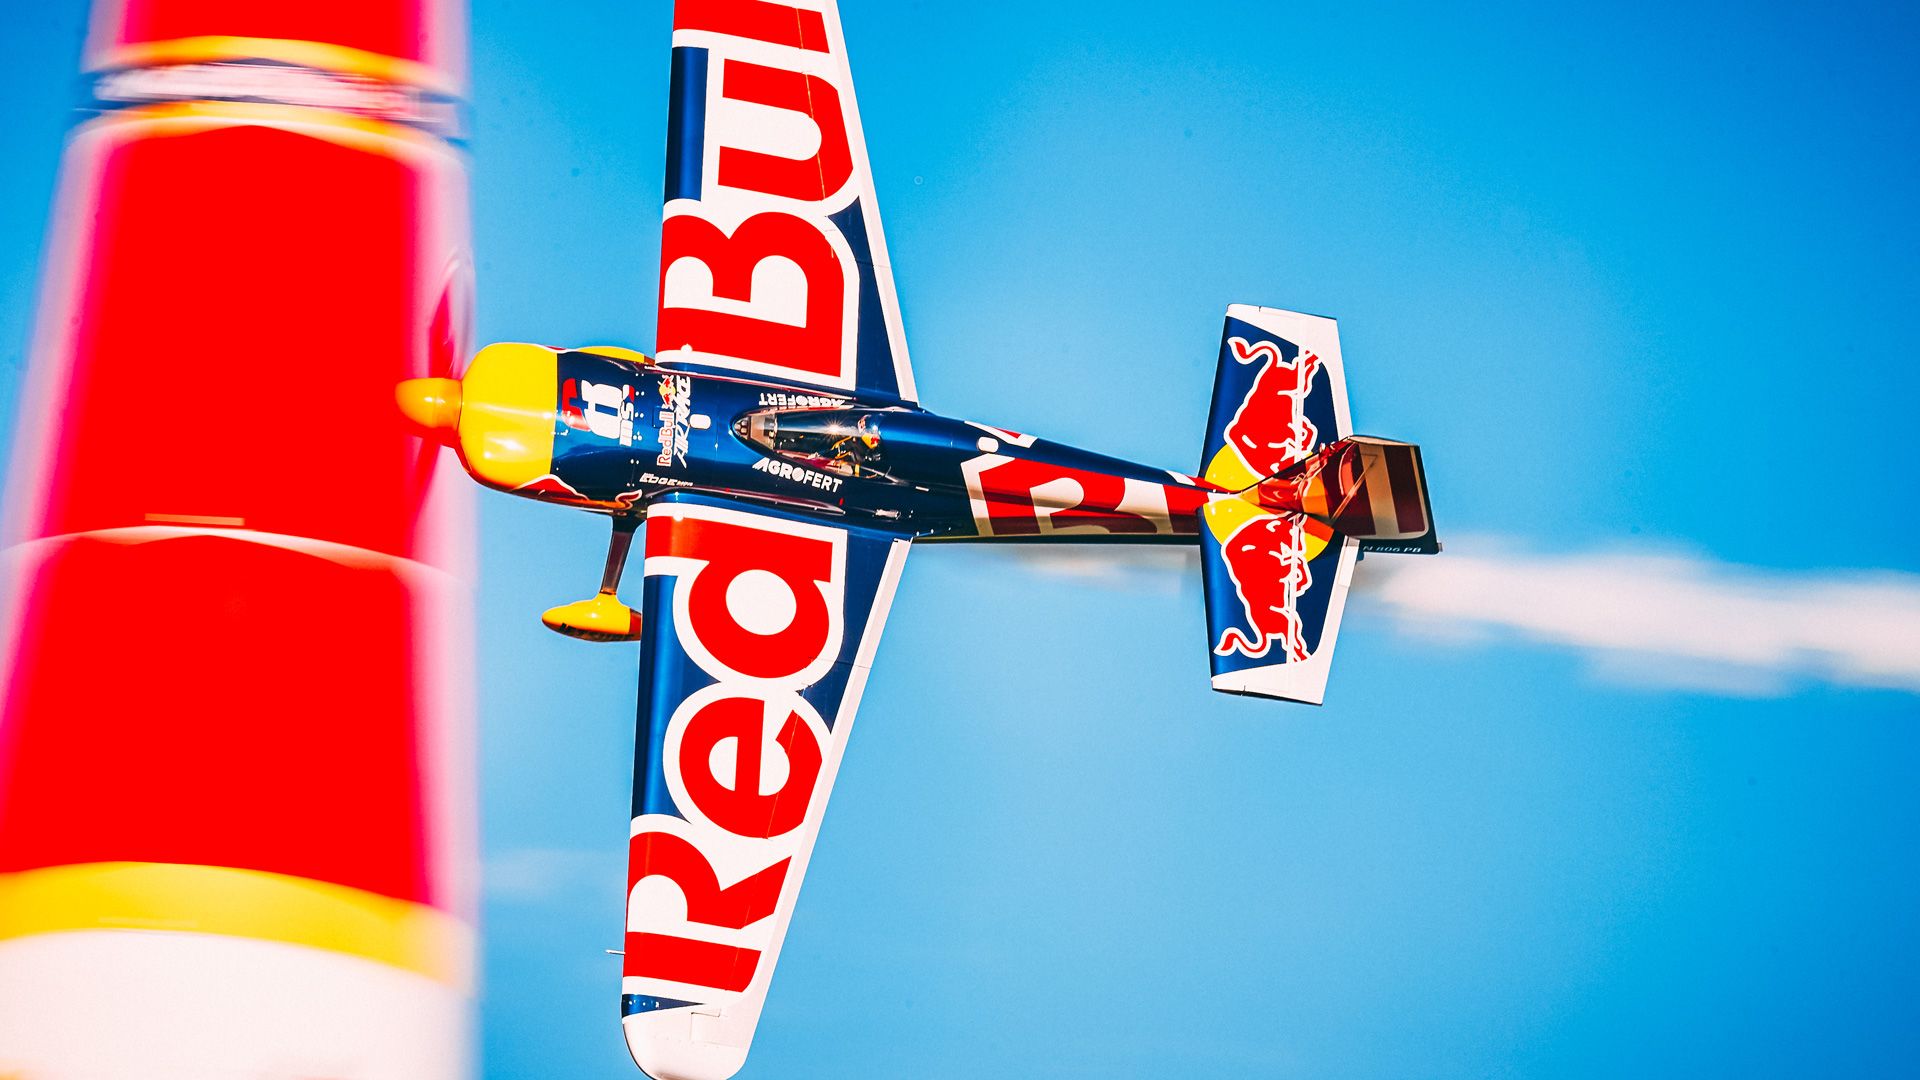 Red Bull Air Race Indianapolis